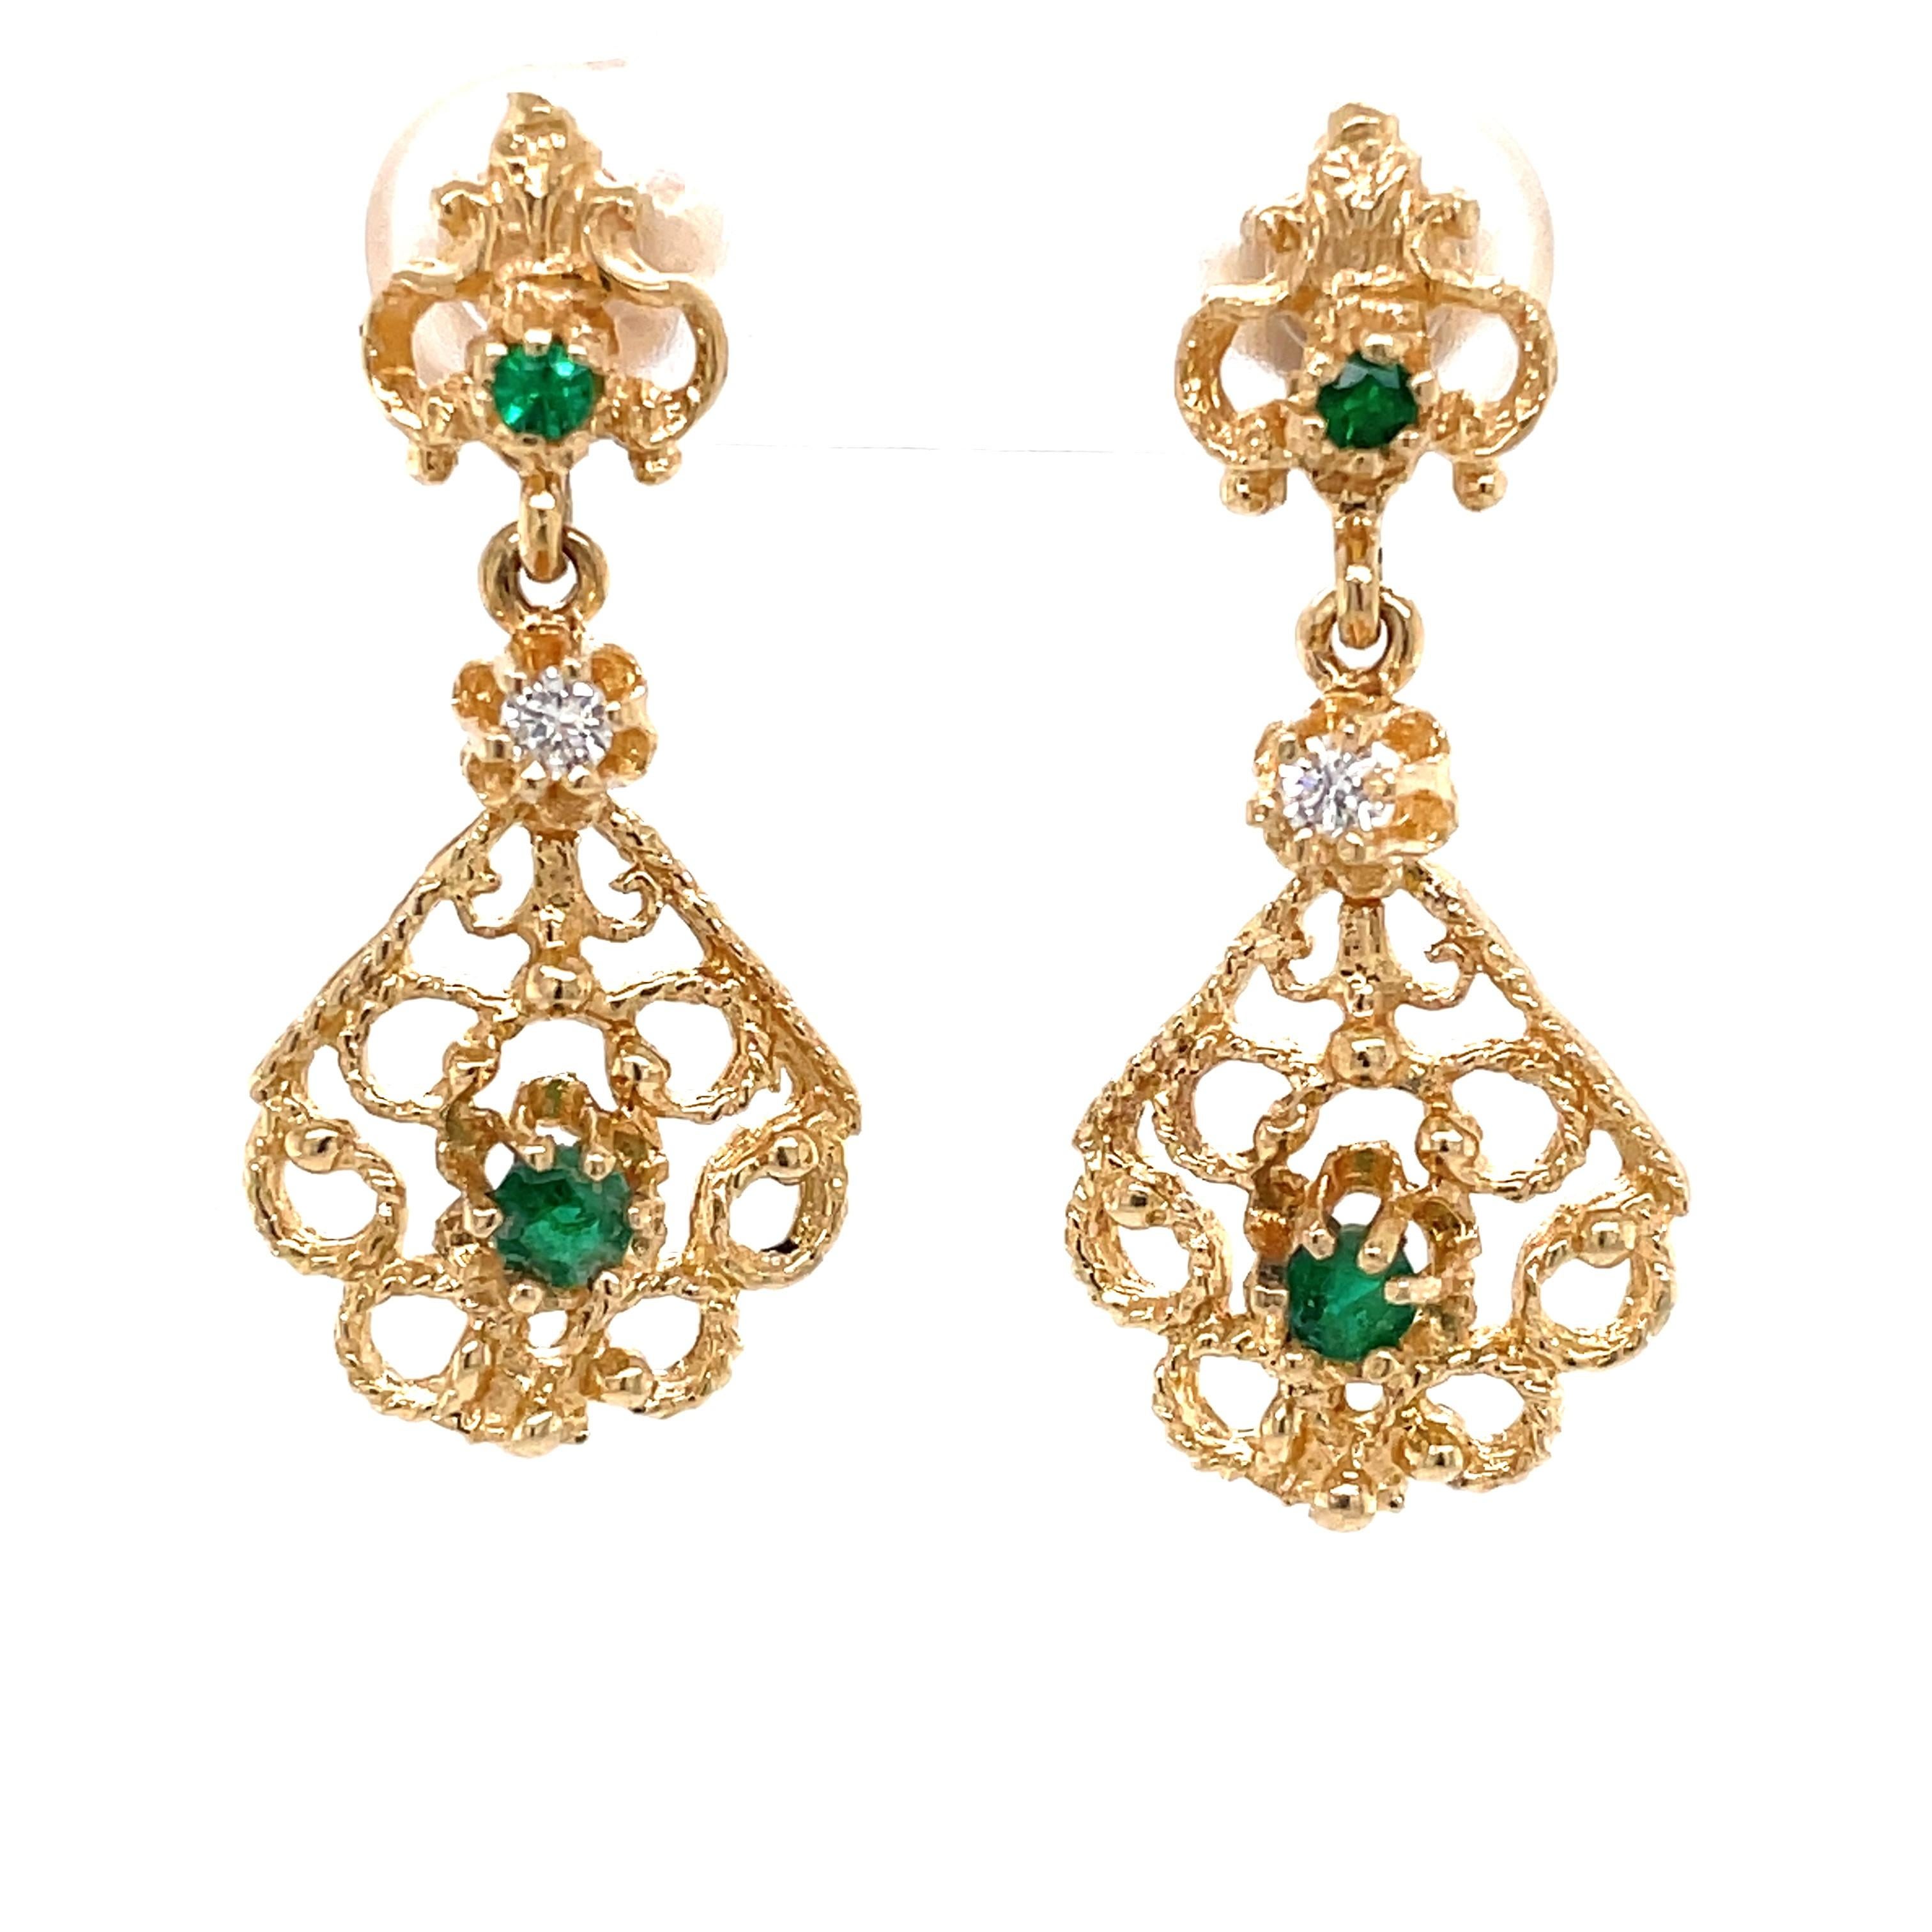 Emerald and diamond accents dress up this regal pair of fourteen karat 14k yellow gold drop earrings. Four round faceted emeralds, two .05 carat and two .01 carat plus two .02 carat H/VS diamonds
adorn the elegant gold filigree of this Victorian